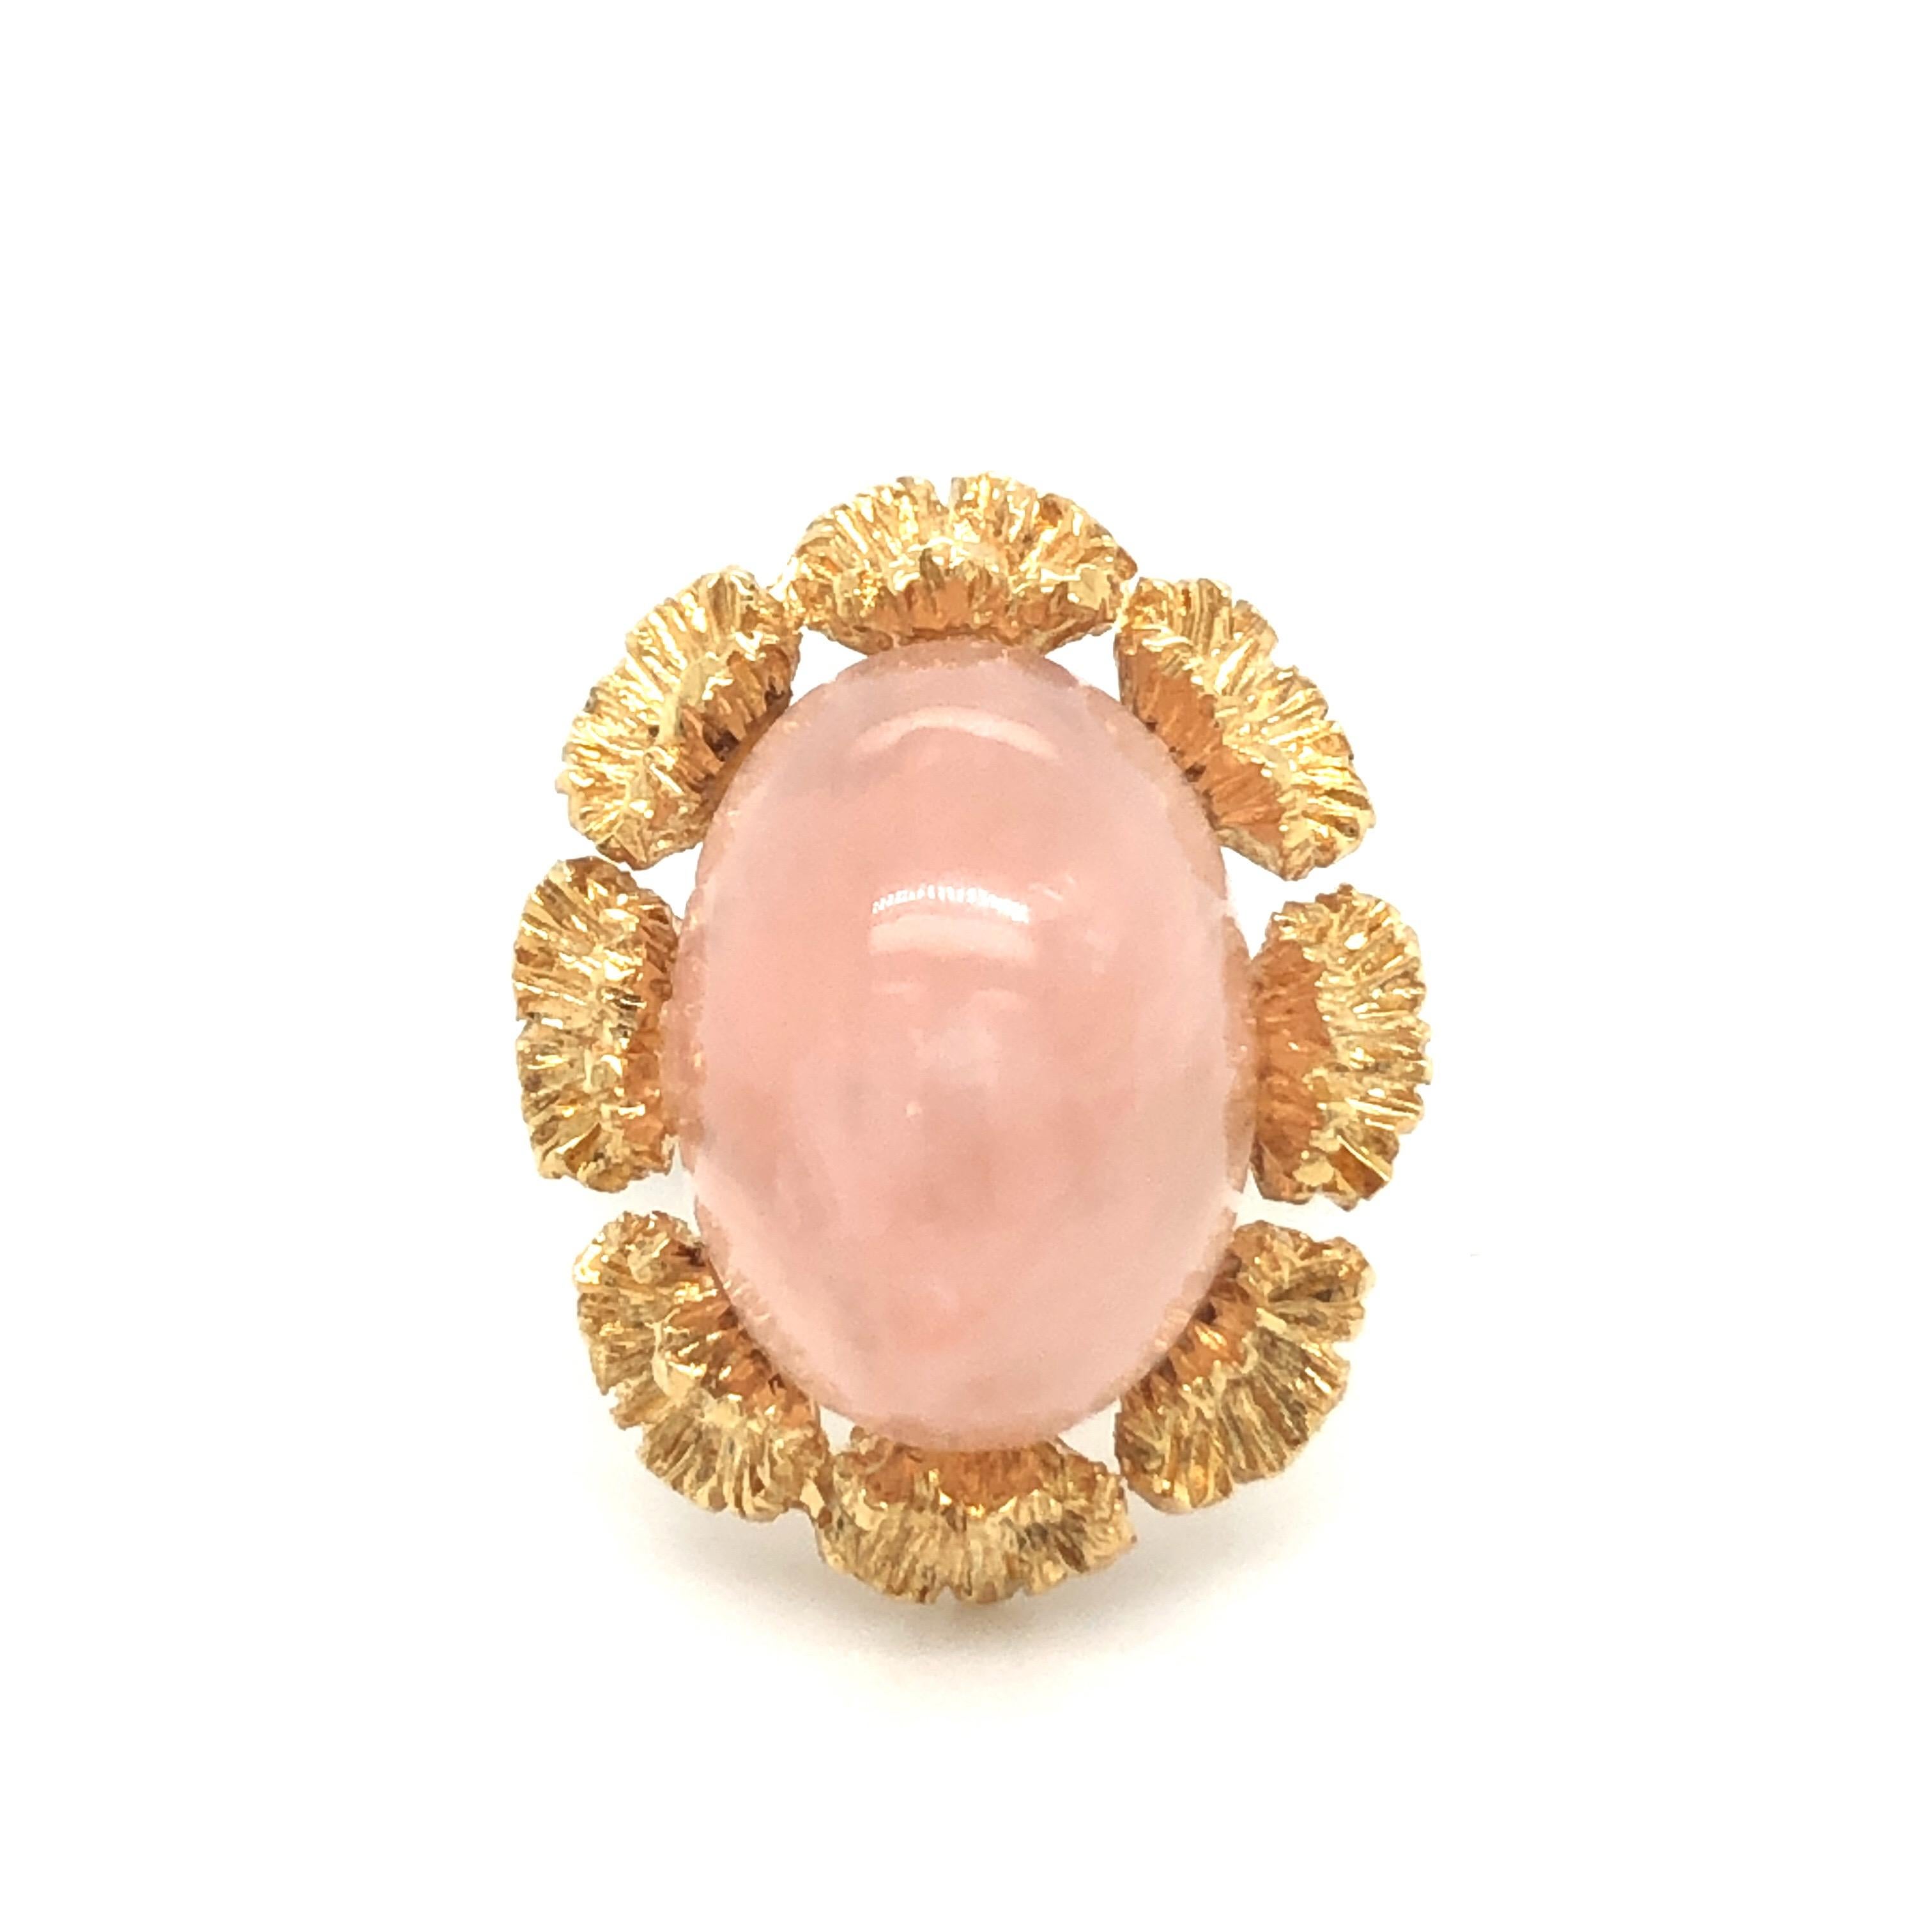 Romantic 18 karat rose gold and rose quartz cocktail ring.
Crafted in 18 karat rose gold and set with an oval pastel rose quartz cabochon of circa 15 carats surrounded by a wreath of structured 18 karat gold flowers.
This jewel is in very good